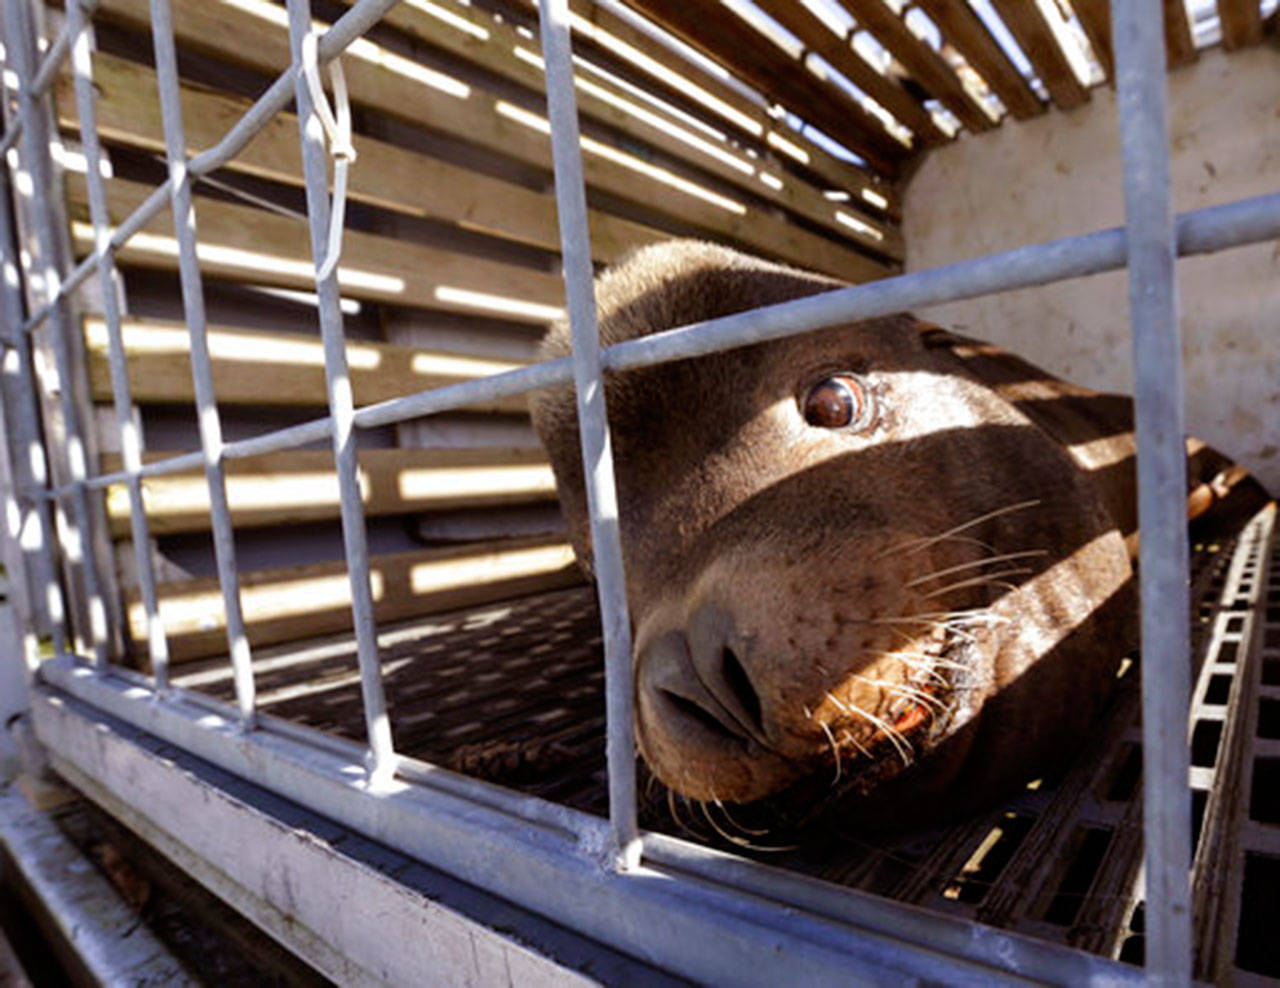 A California sea lion that was trapped at Willamette Falls in the lower Willamette River waits to be released into the Pacific Ocean near Newport, Ore., on March 14. Oregon officials have now received federal approval to trap and kill California sea lions that eat protected fish at Willamette Falls instead of releasing them into the ocean. (Don Ryan/The Associated Press)